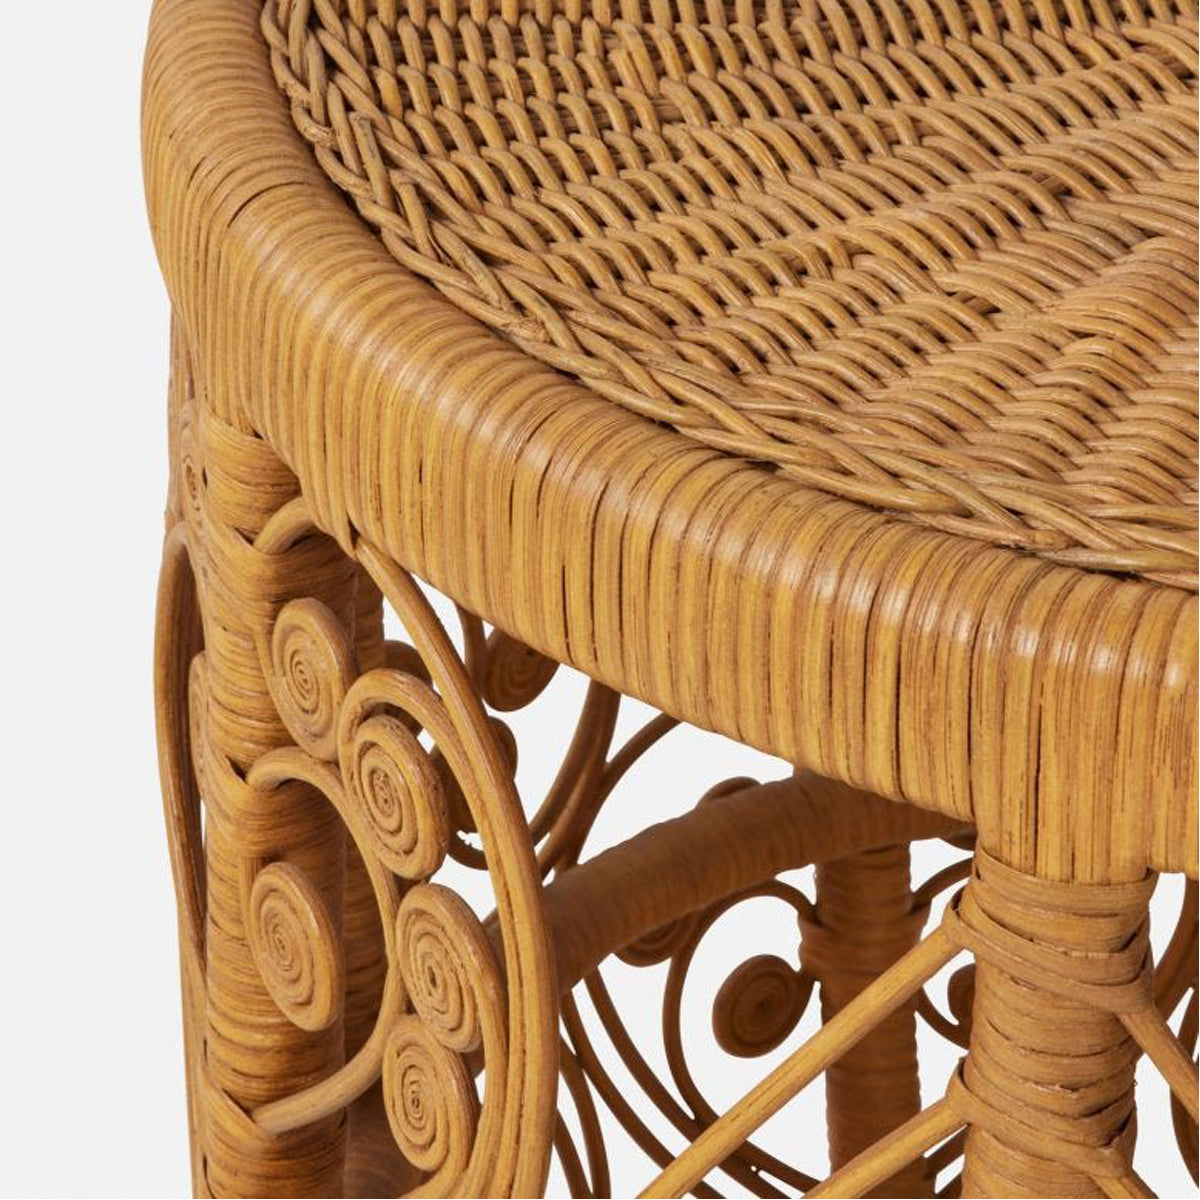 Made Goods Maybelle Barrel-Style Side Table in Curlicue Wicker